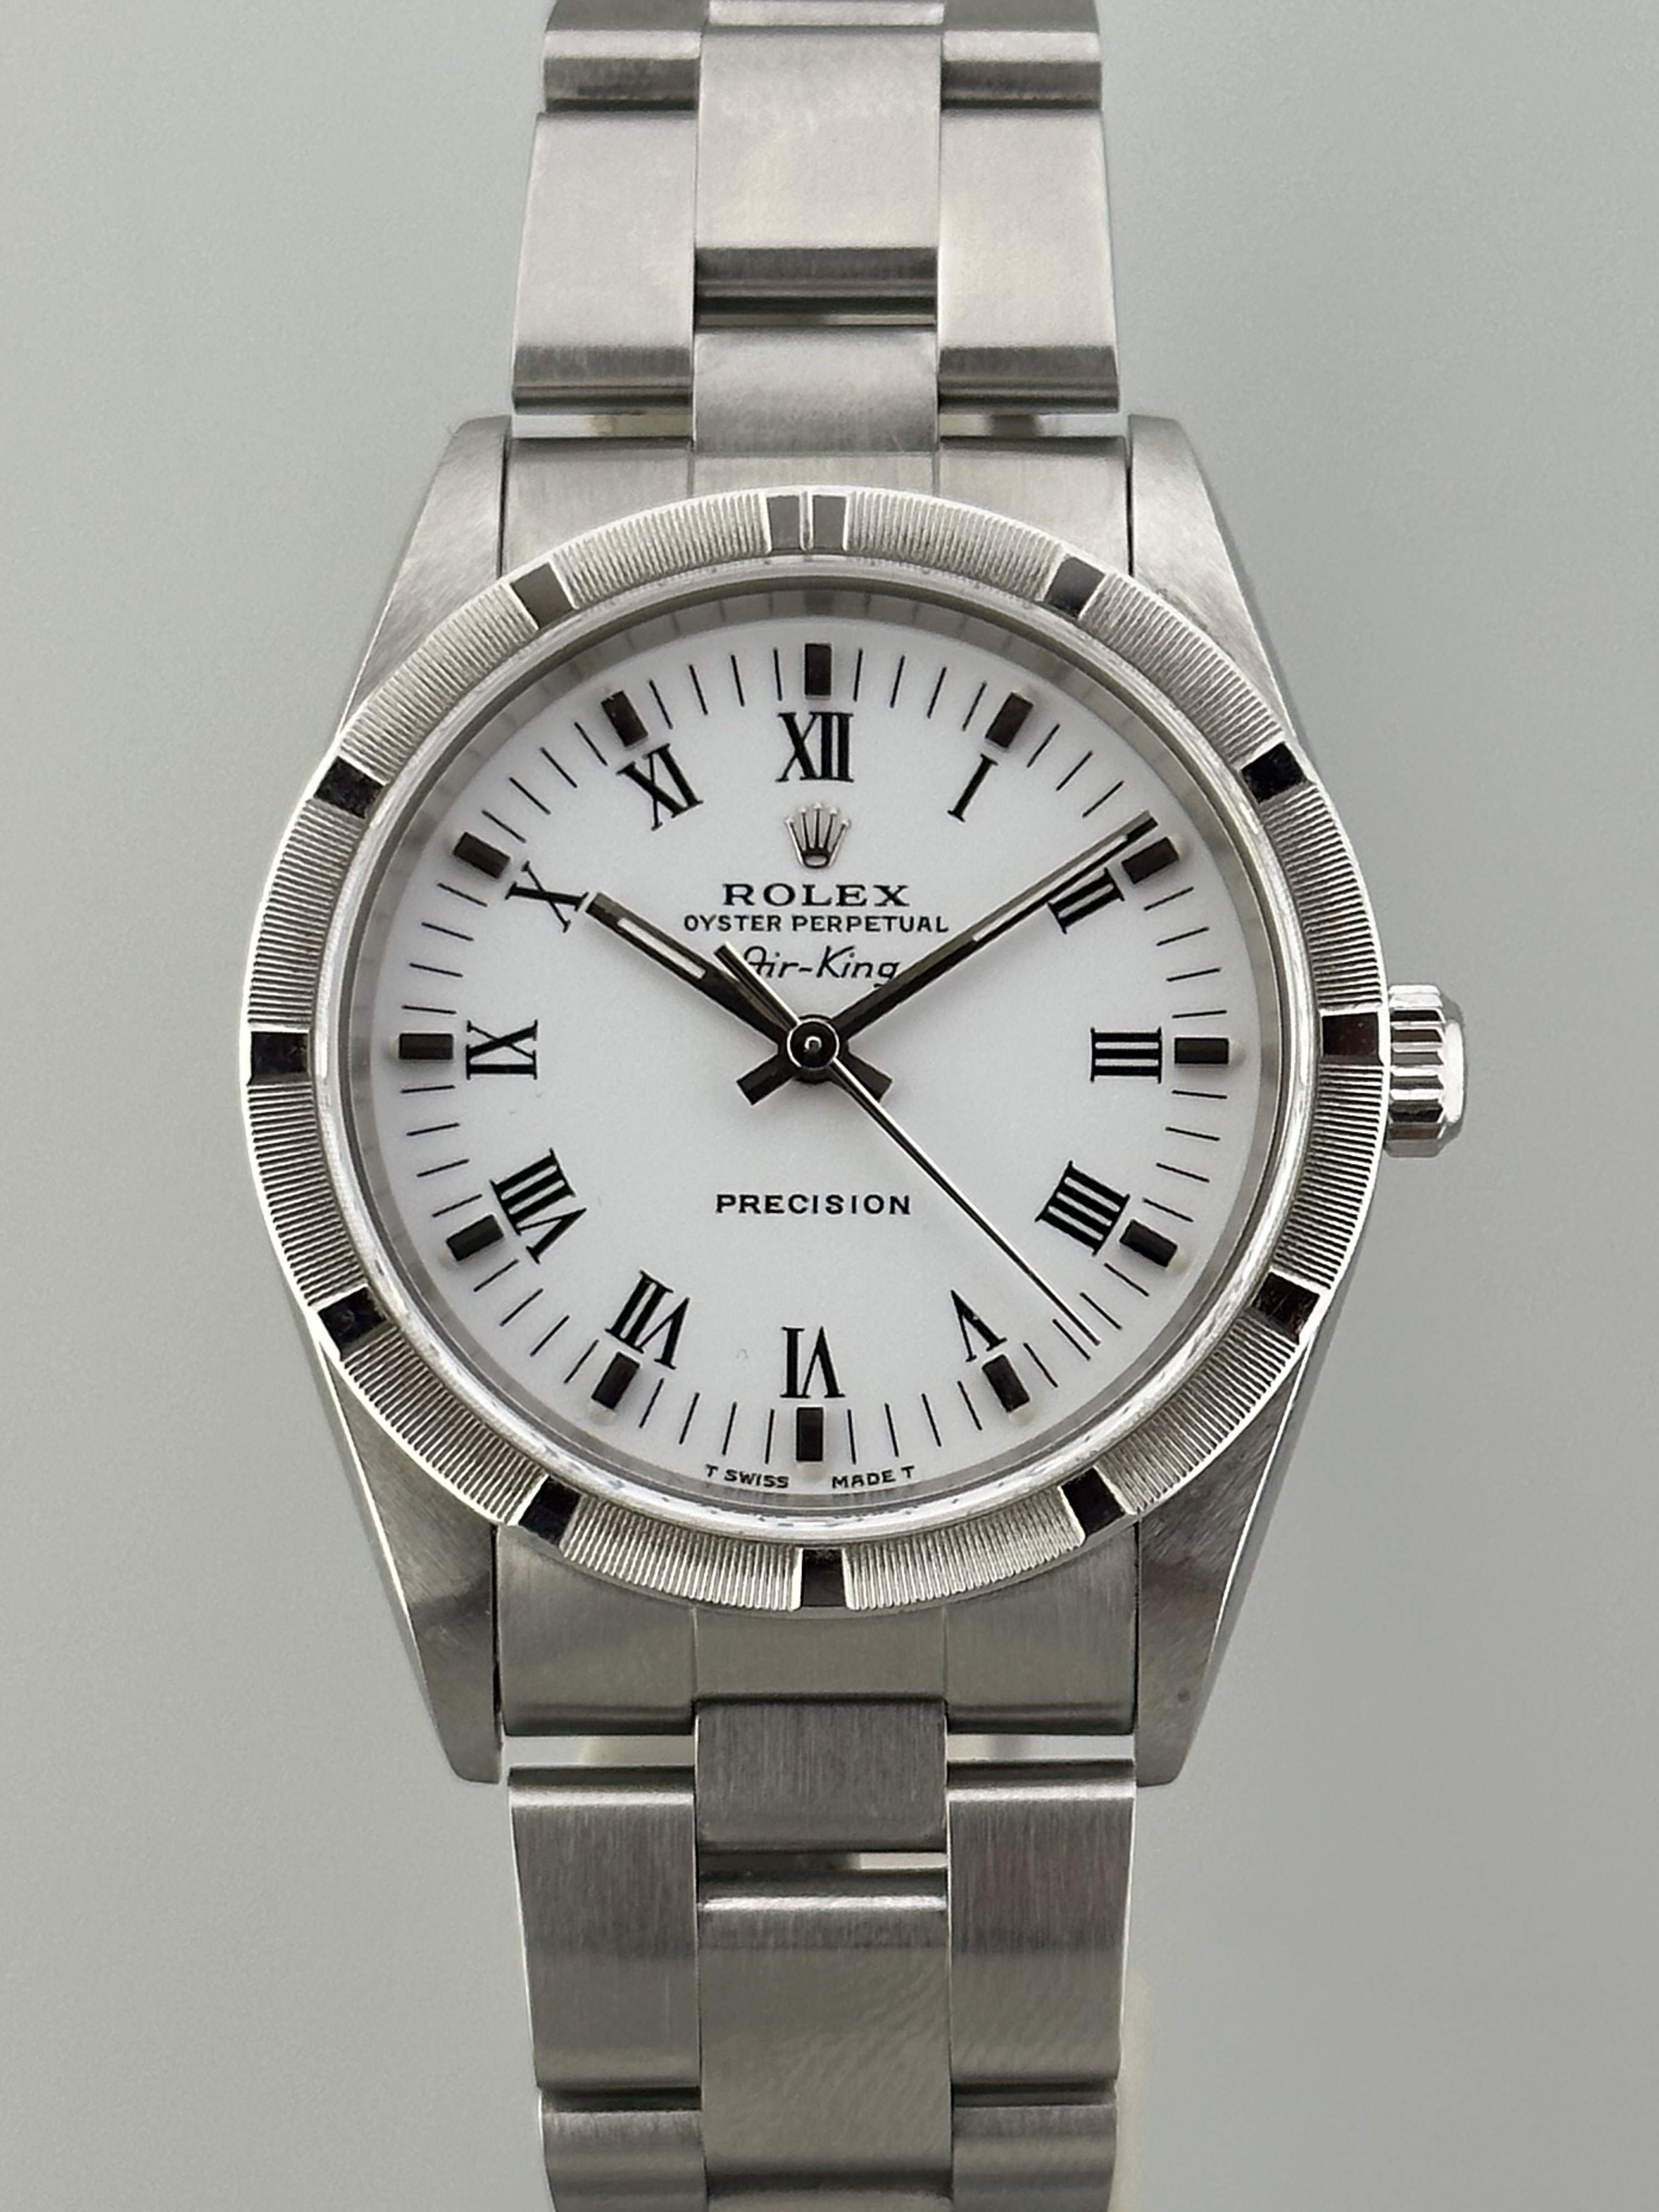 Rolex Air king ref: 14010 | Foto frontale